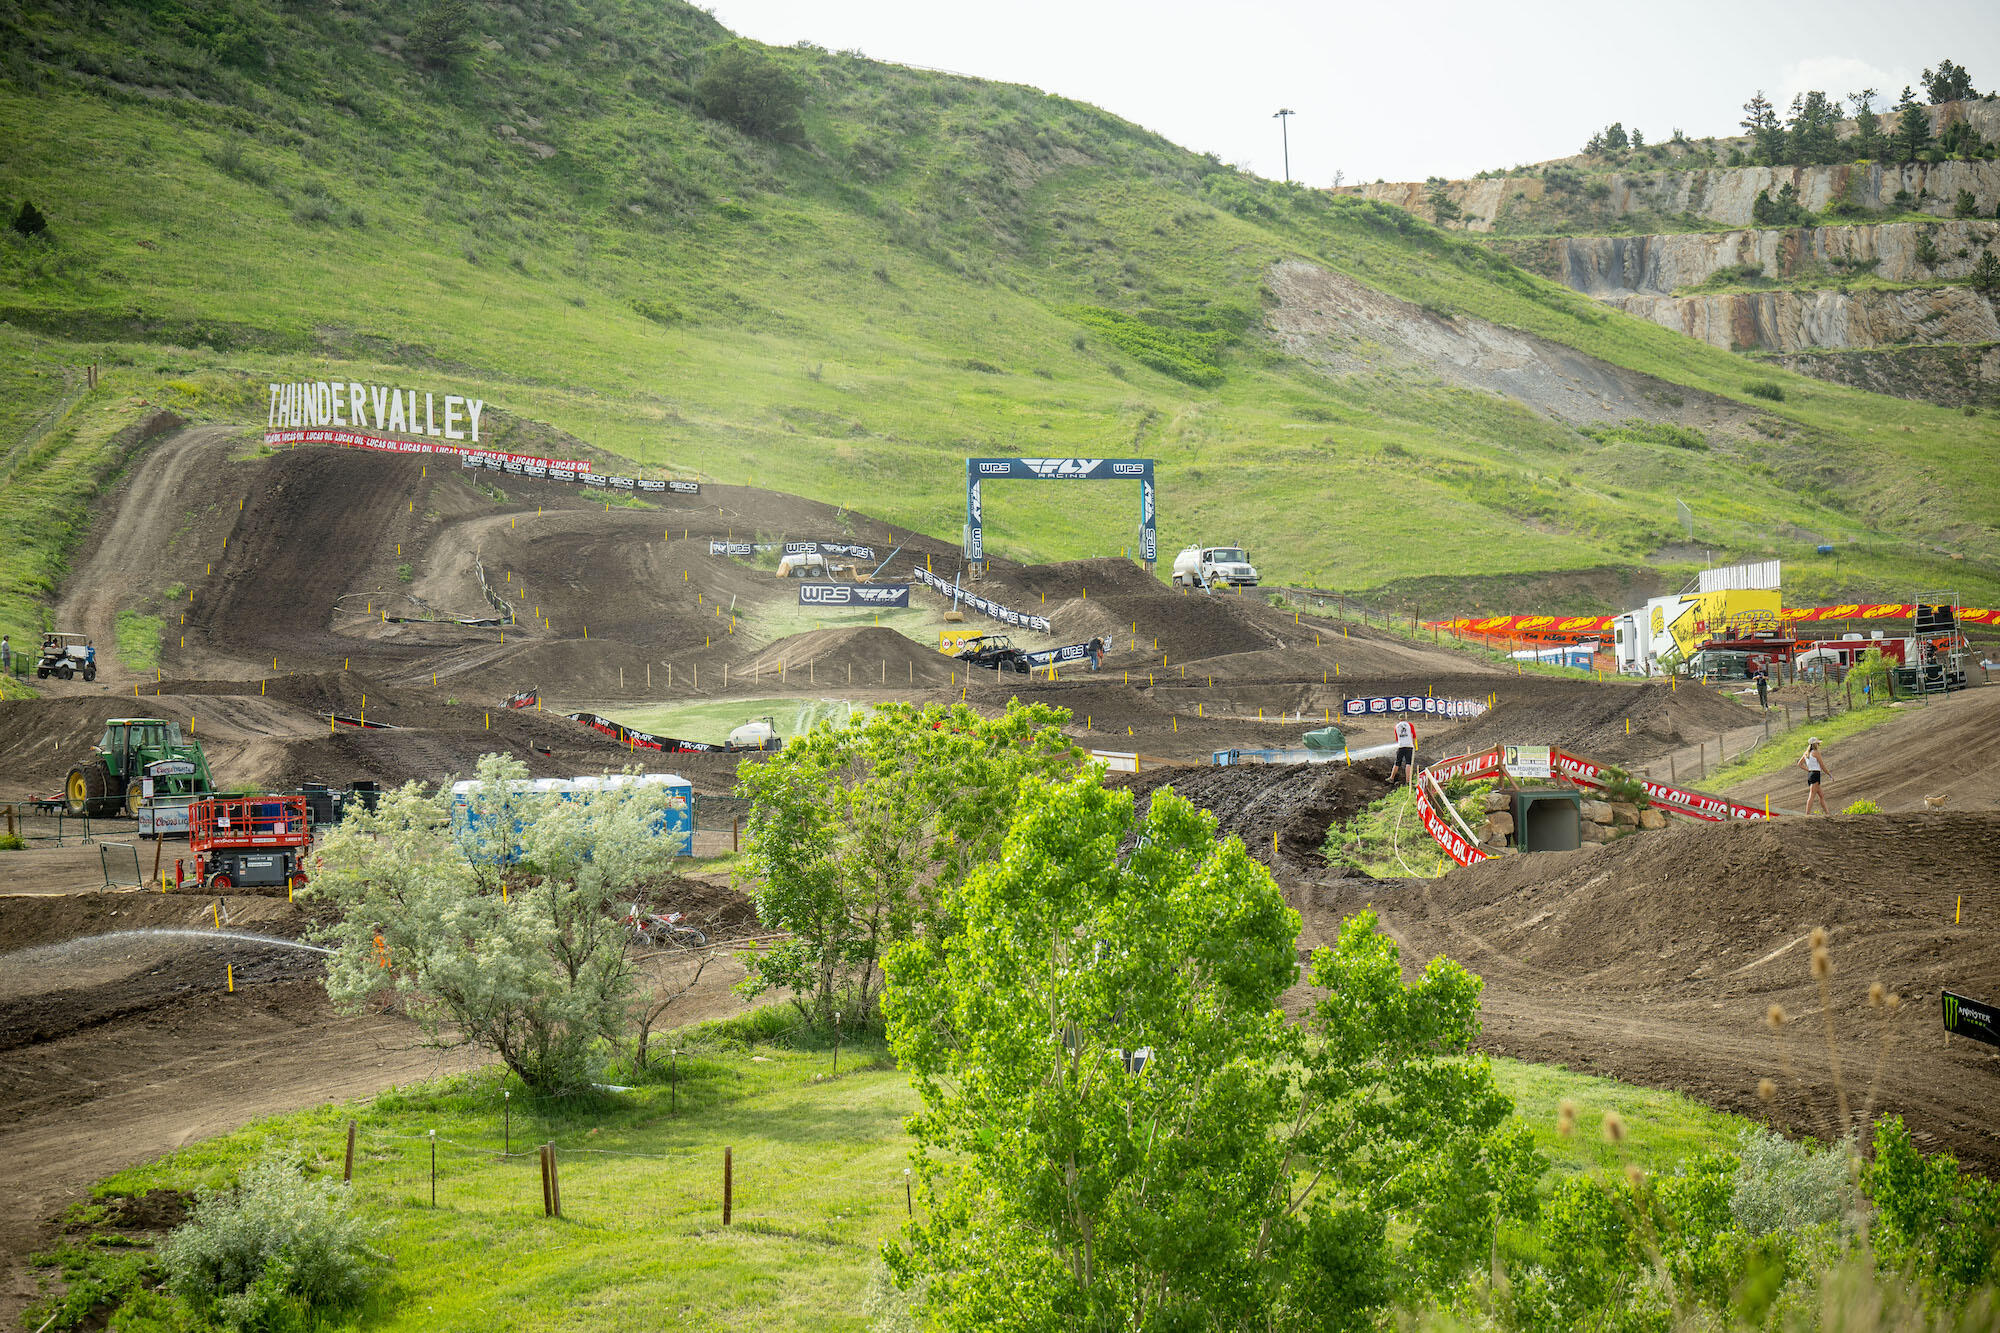 How To Watch Toyota Thunder Valley National Pro Motocross Championship